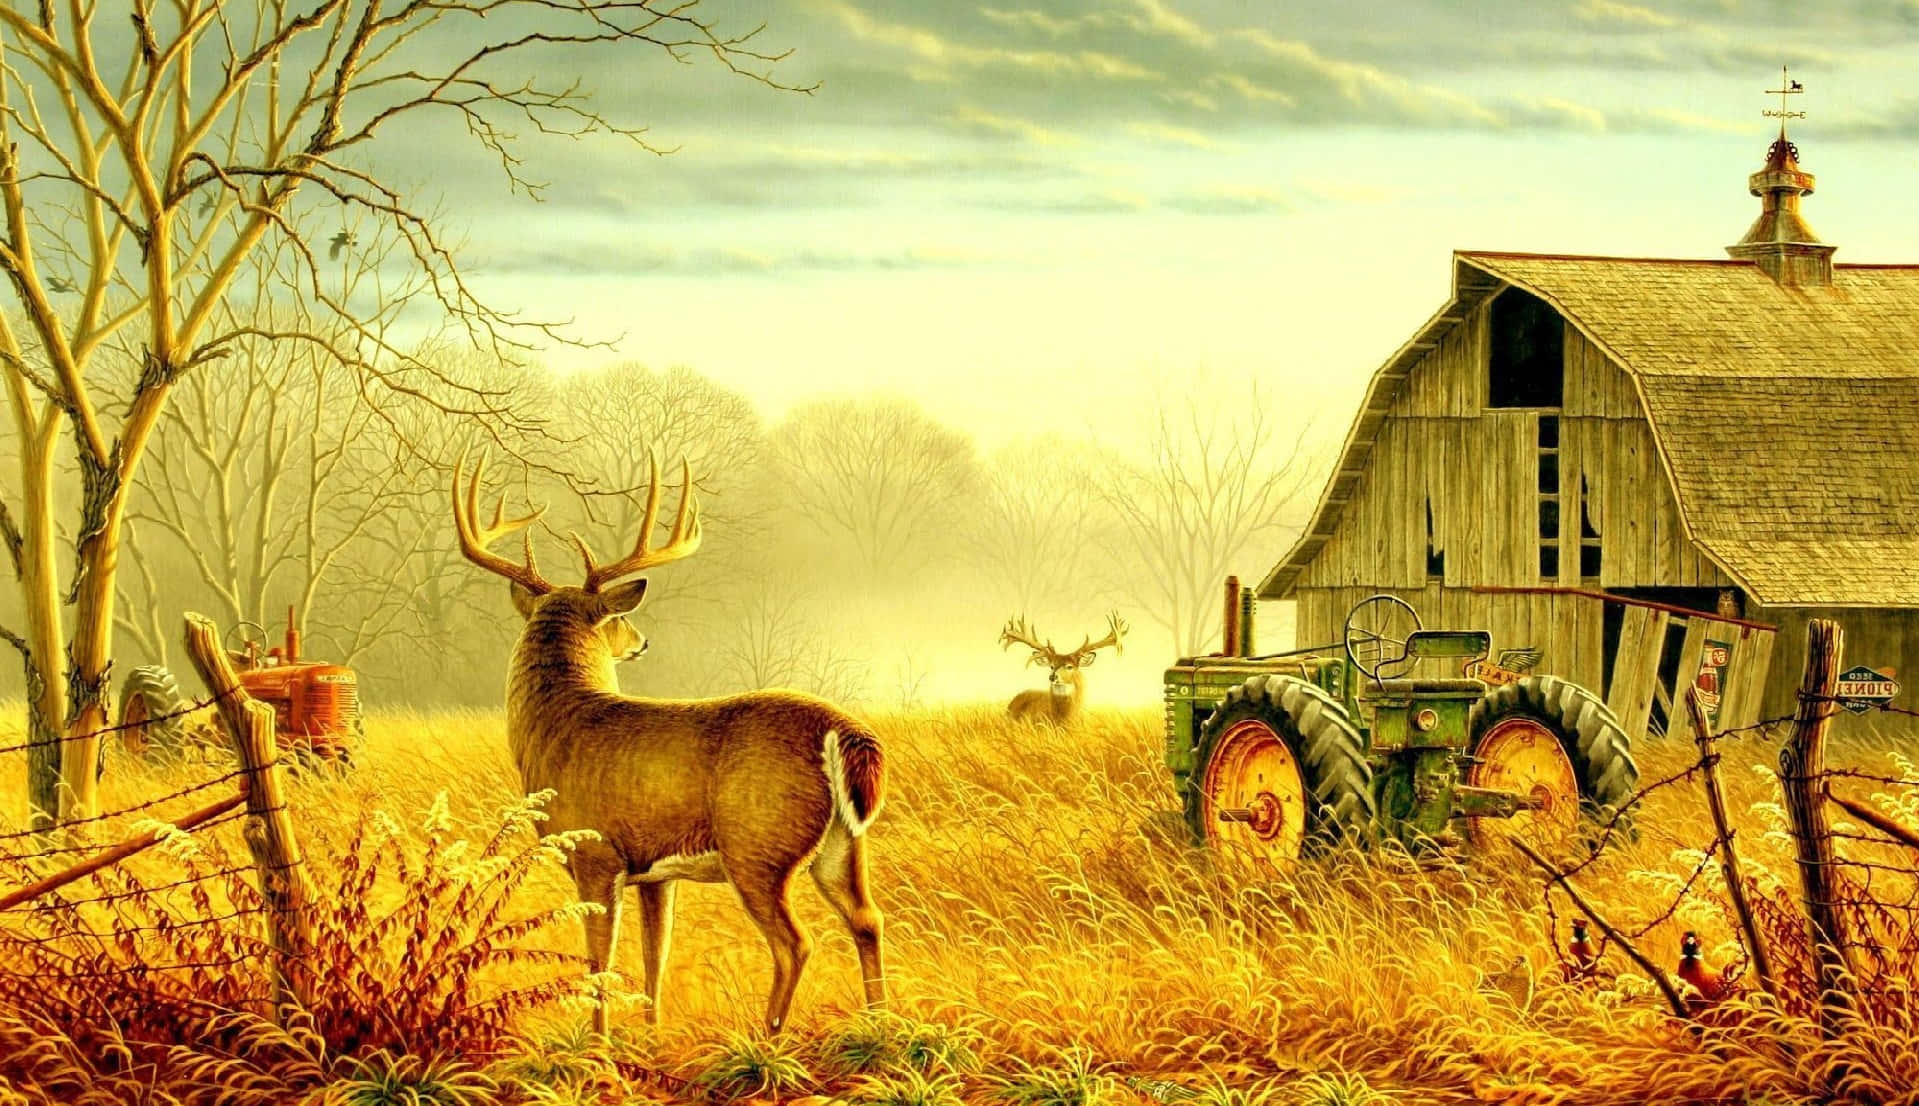 Fall Barn surrounded by vibrant autumn foliage Wallpaper